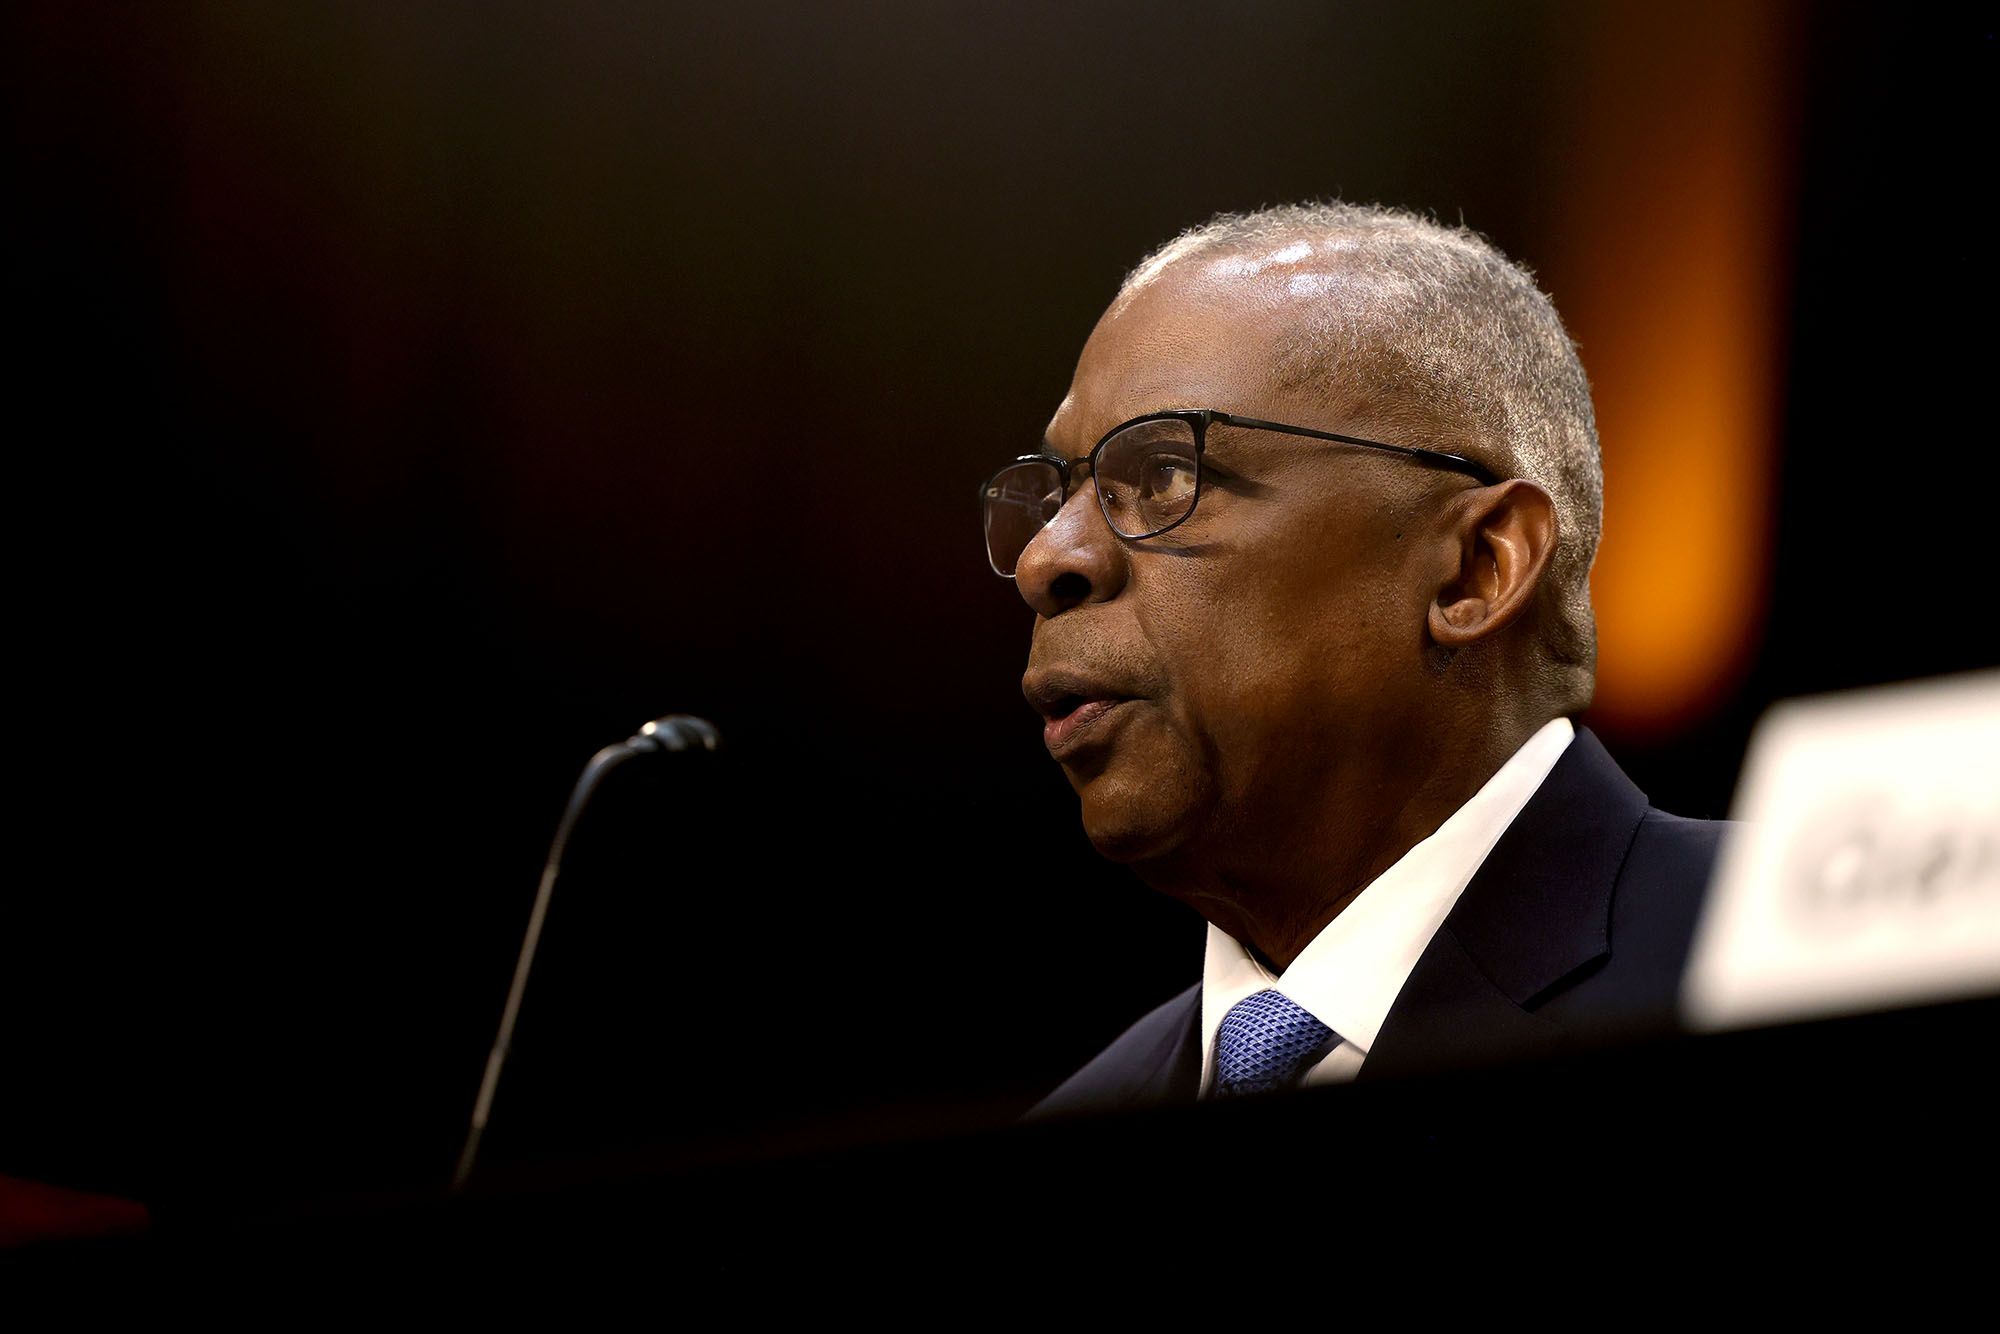 Lloyd Austin, US secretary of defense, during a Senate Armed Services Committee hearing in Washington, D.C., on April 9.